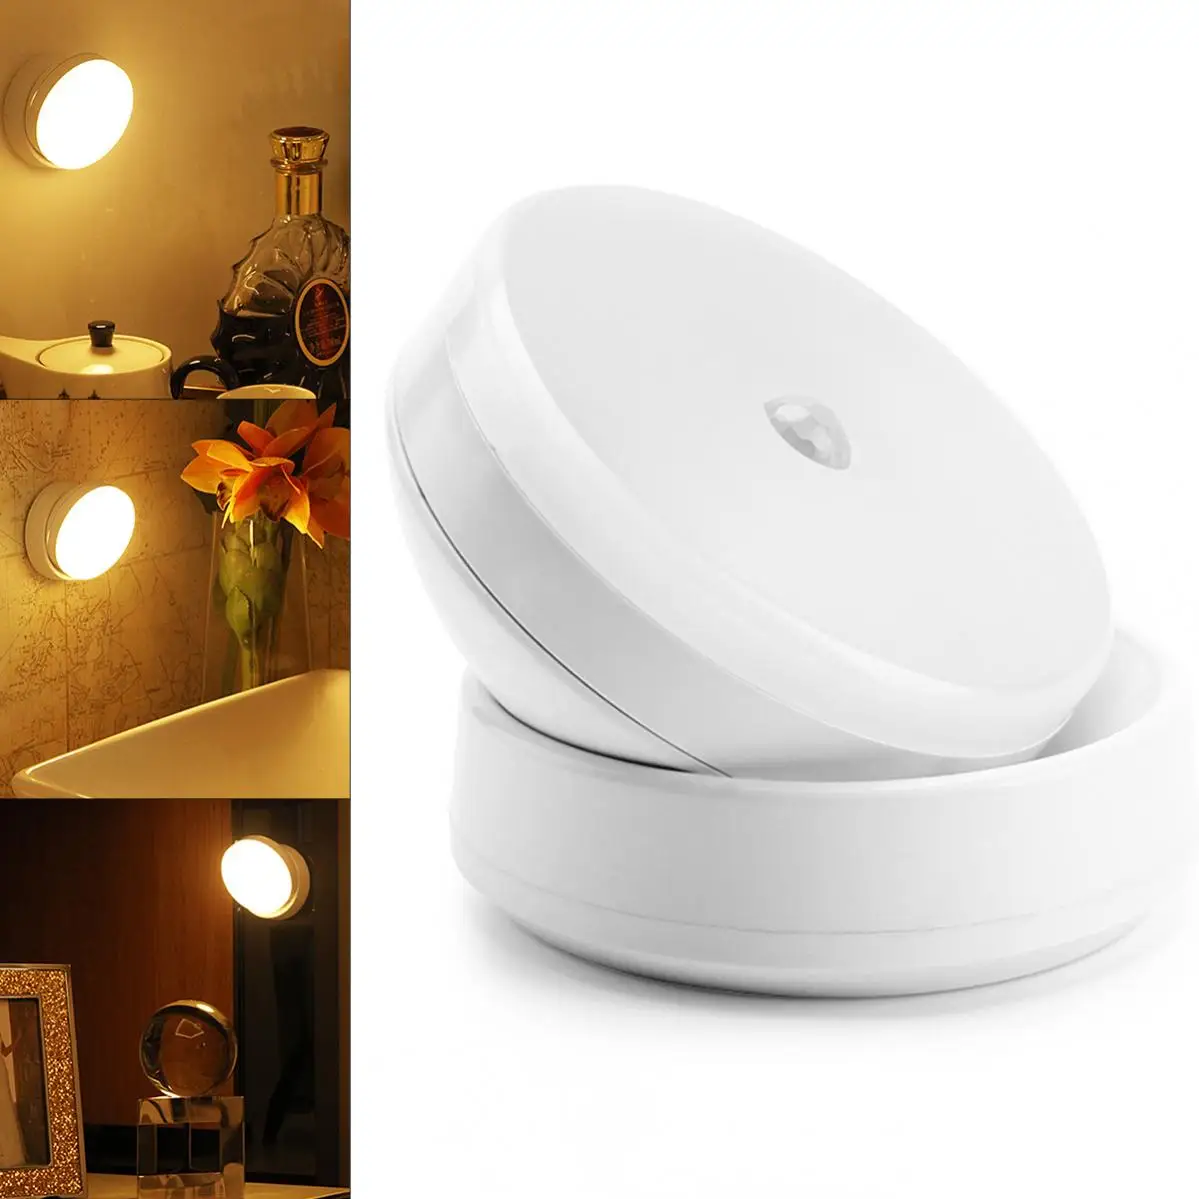 

LED Night Light PIR Induction Lamp Creative Cabinet Closet Wall Lamp for Home Bedroom Corridor Warm White / White Light